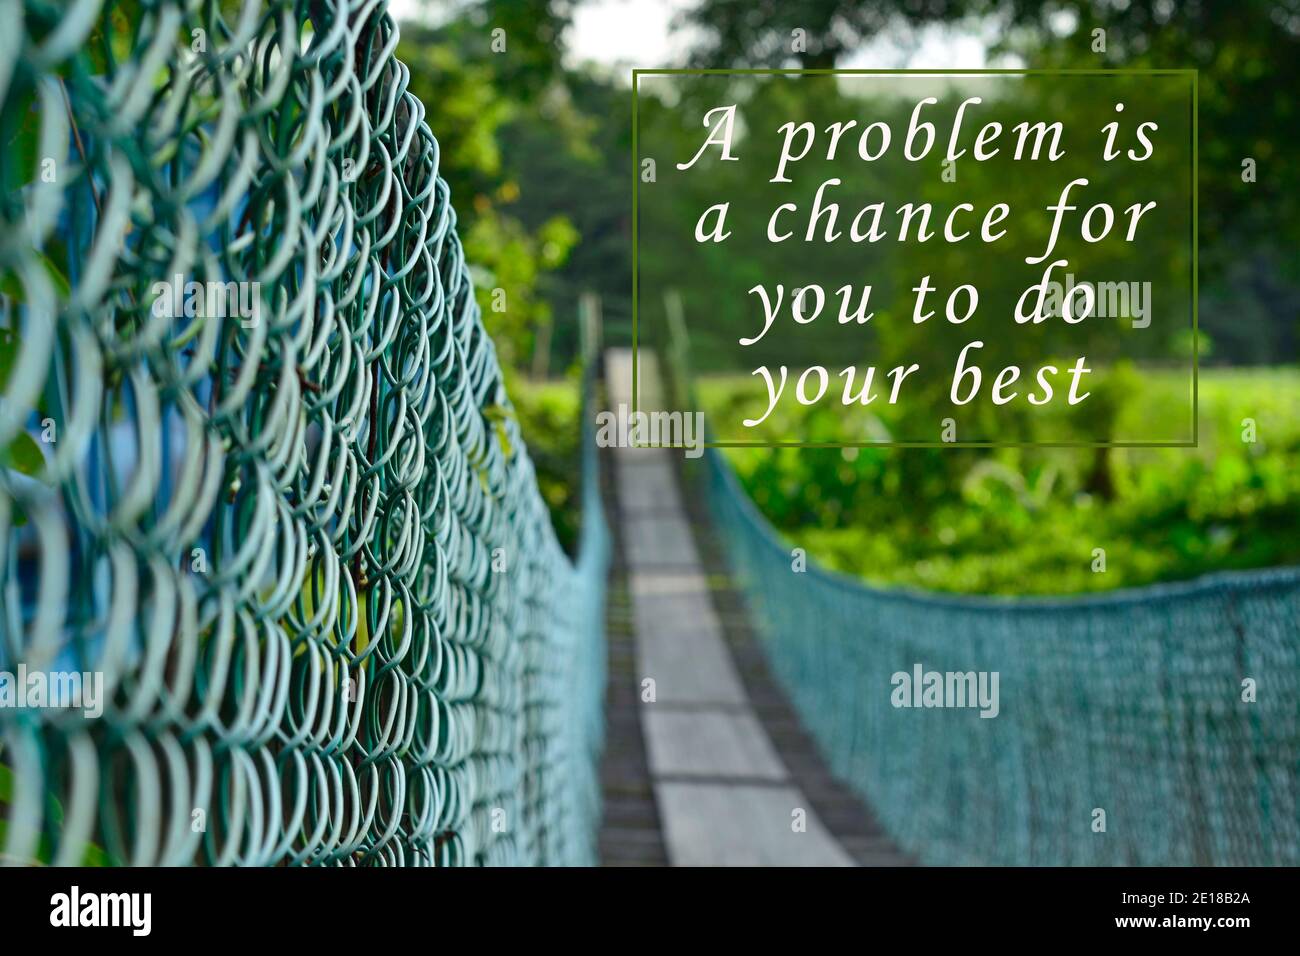 Image with motivational and inspirational quotes and green background Stock  Photo - Alamy